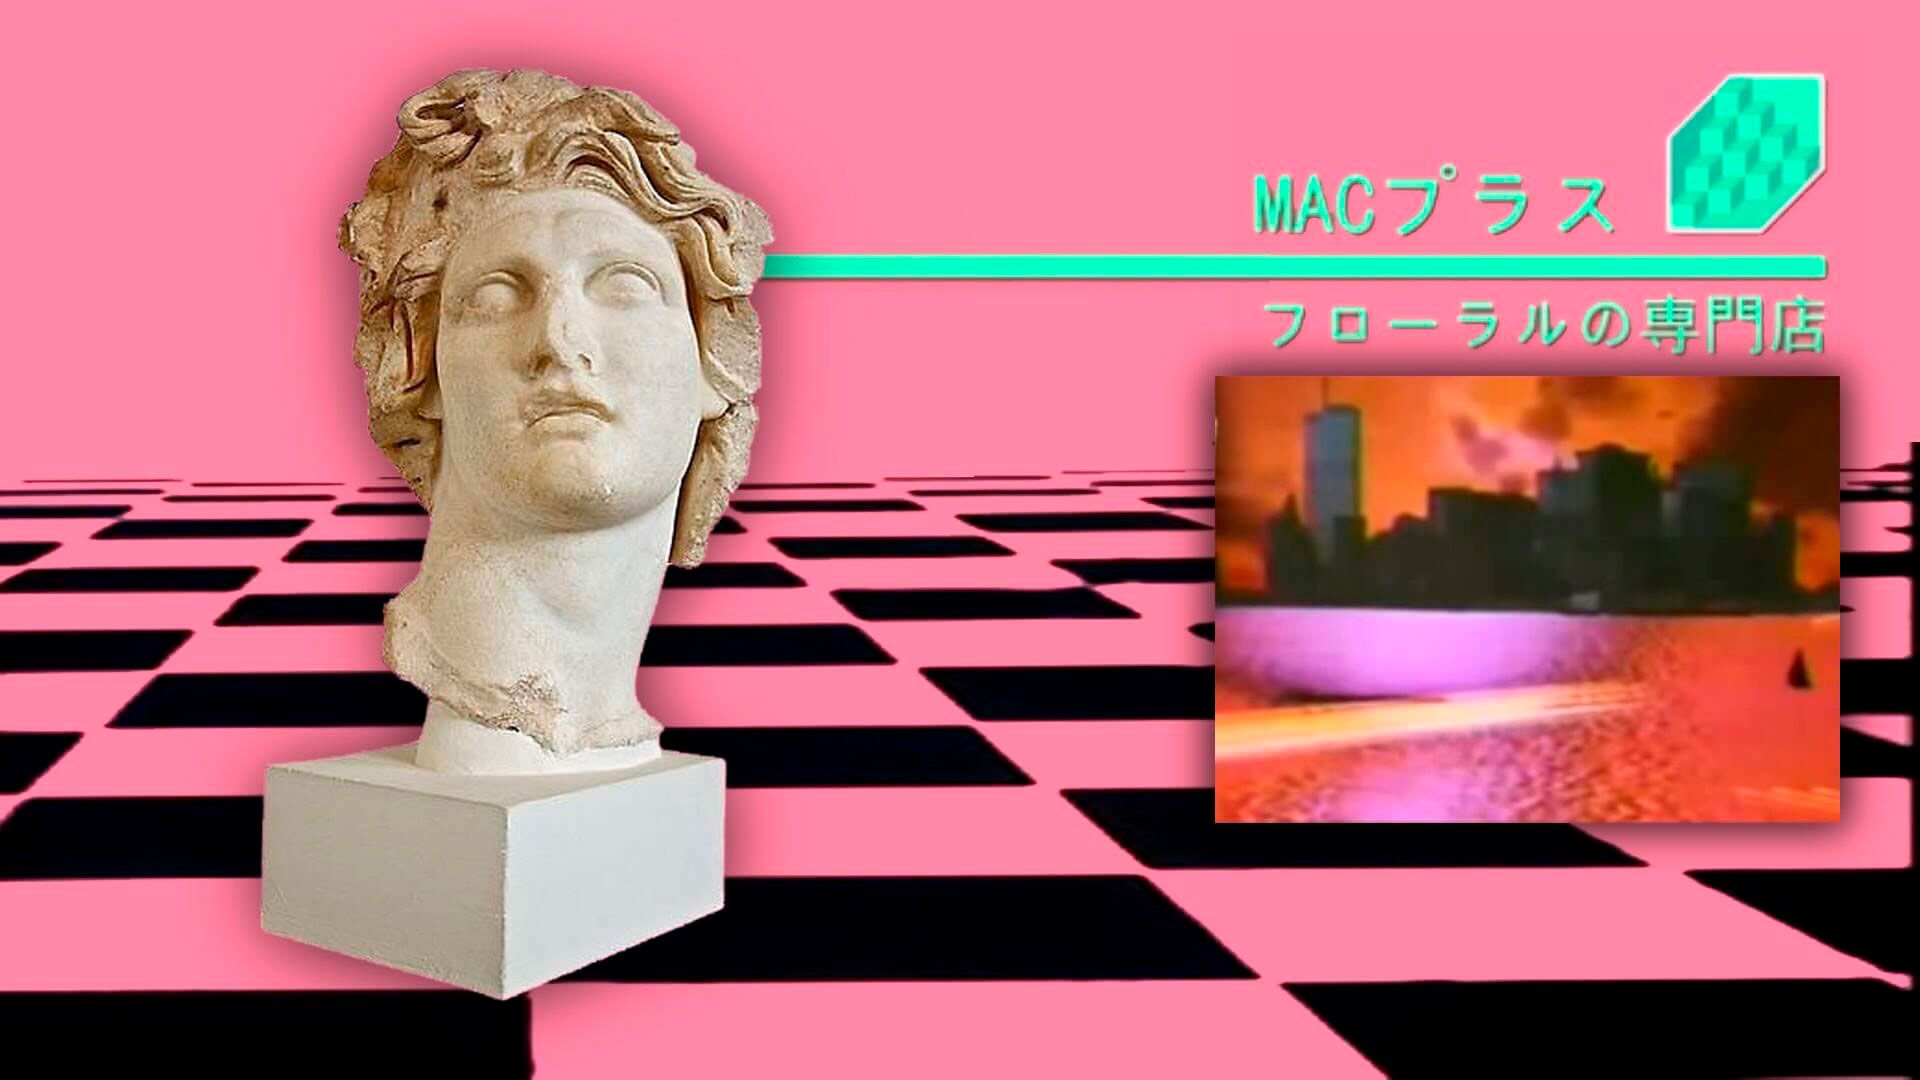 What is Vaporwave? and What is aesthetic? All you need to know